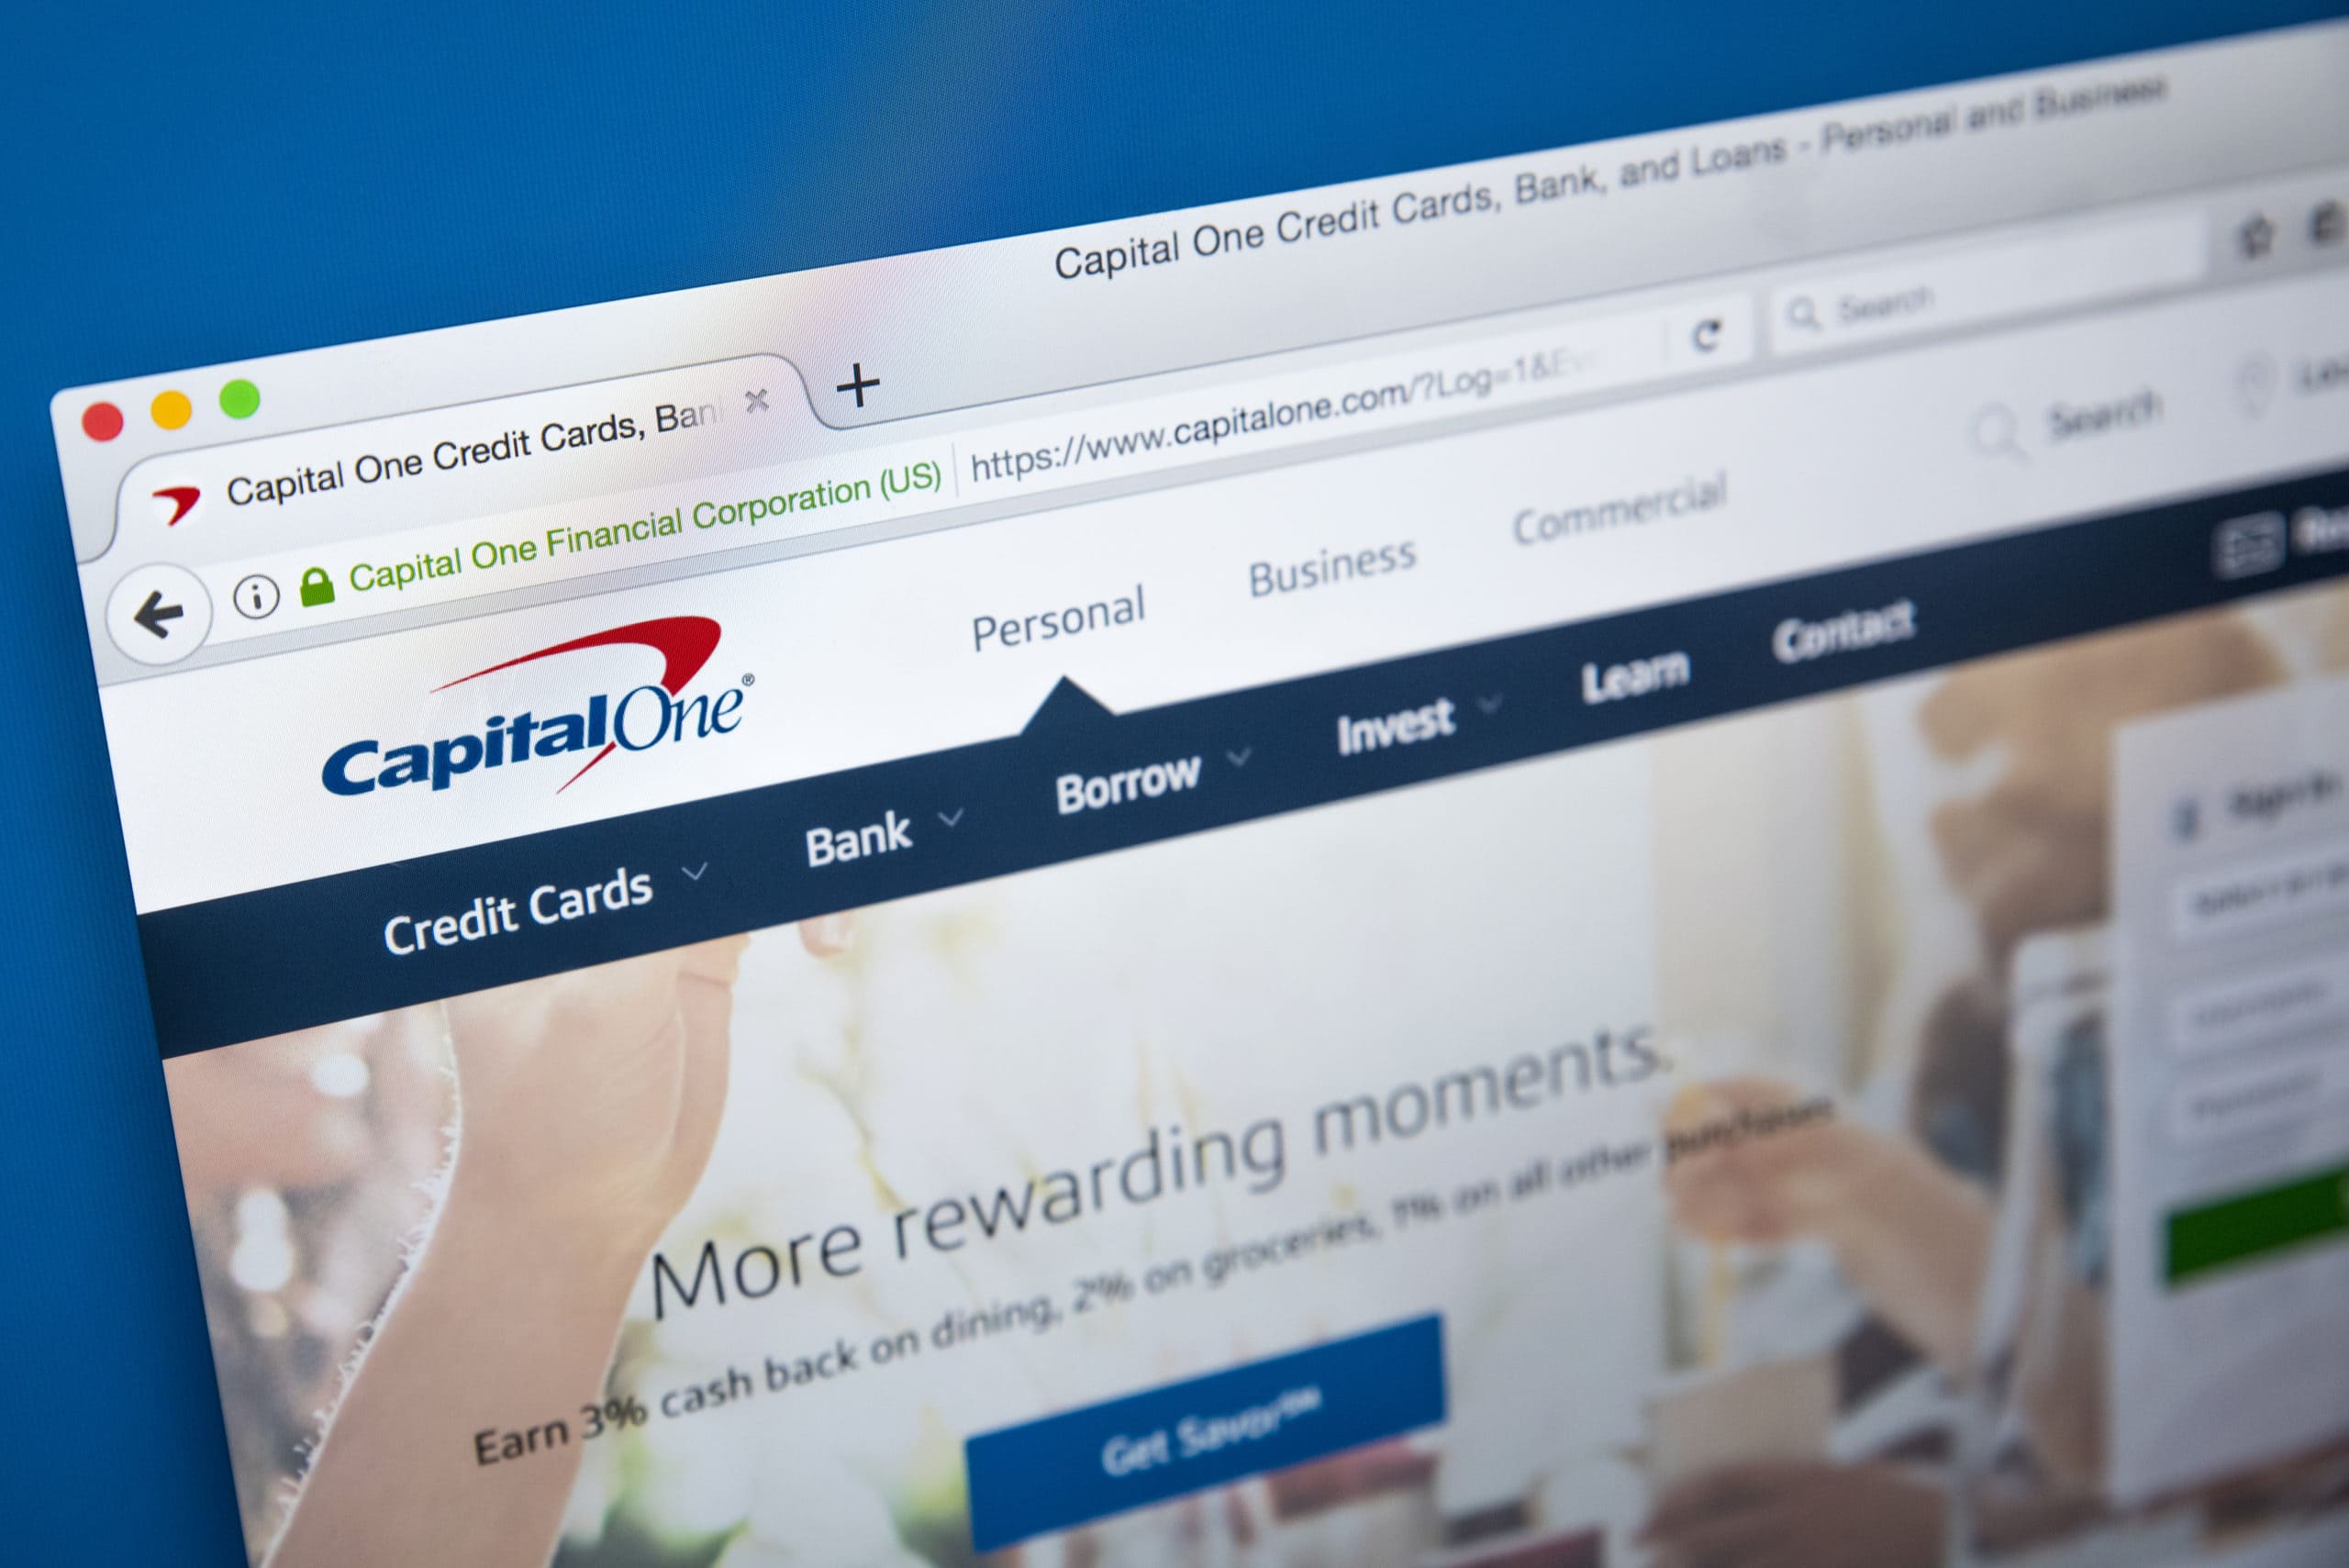 Capital One 360 Bank website offers online savings accounts and CDs